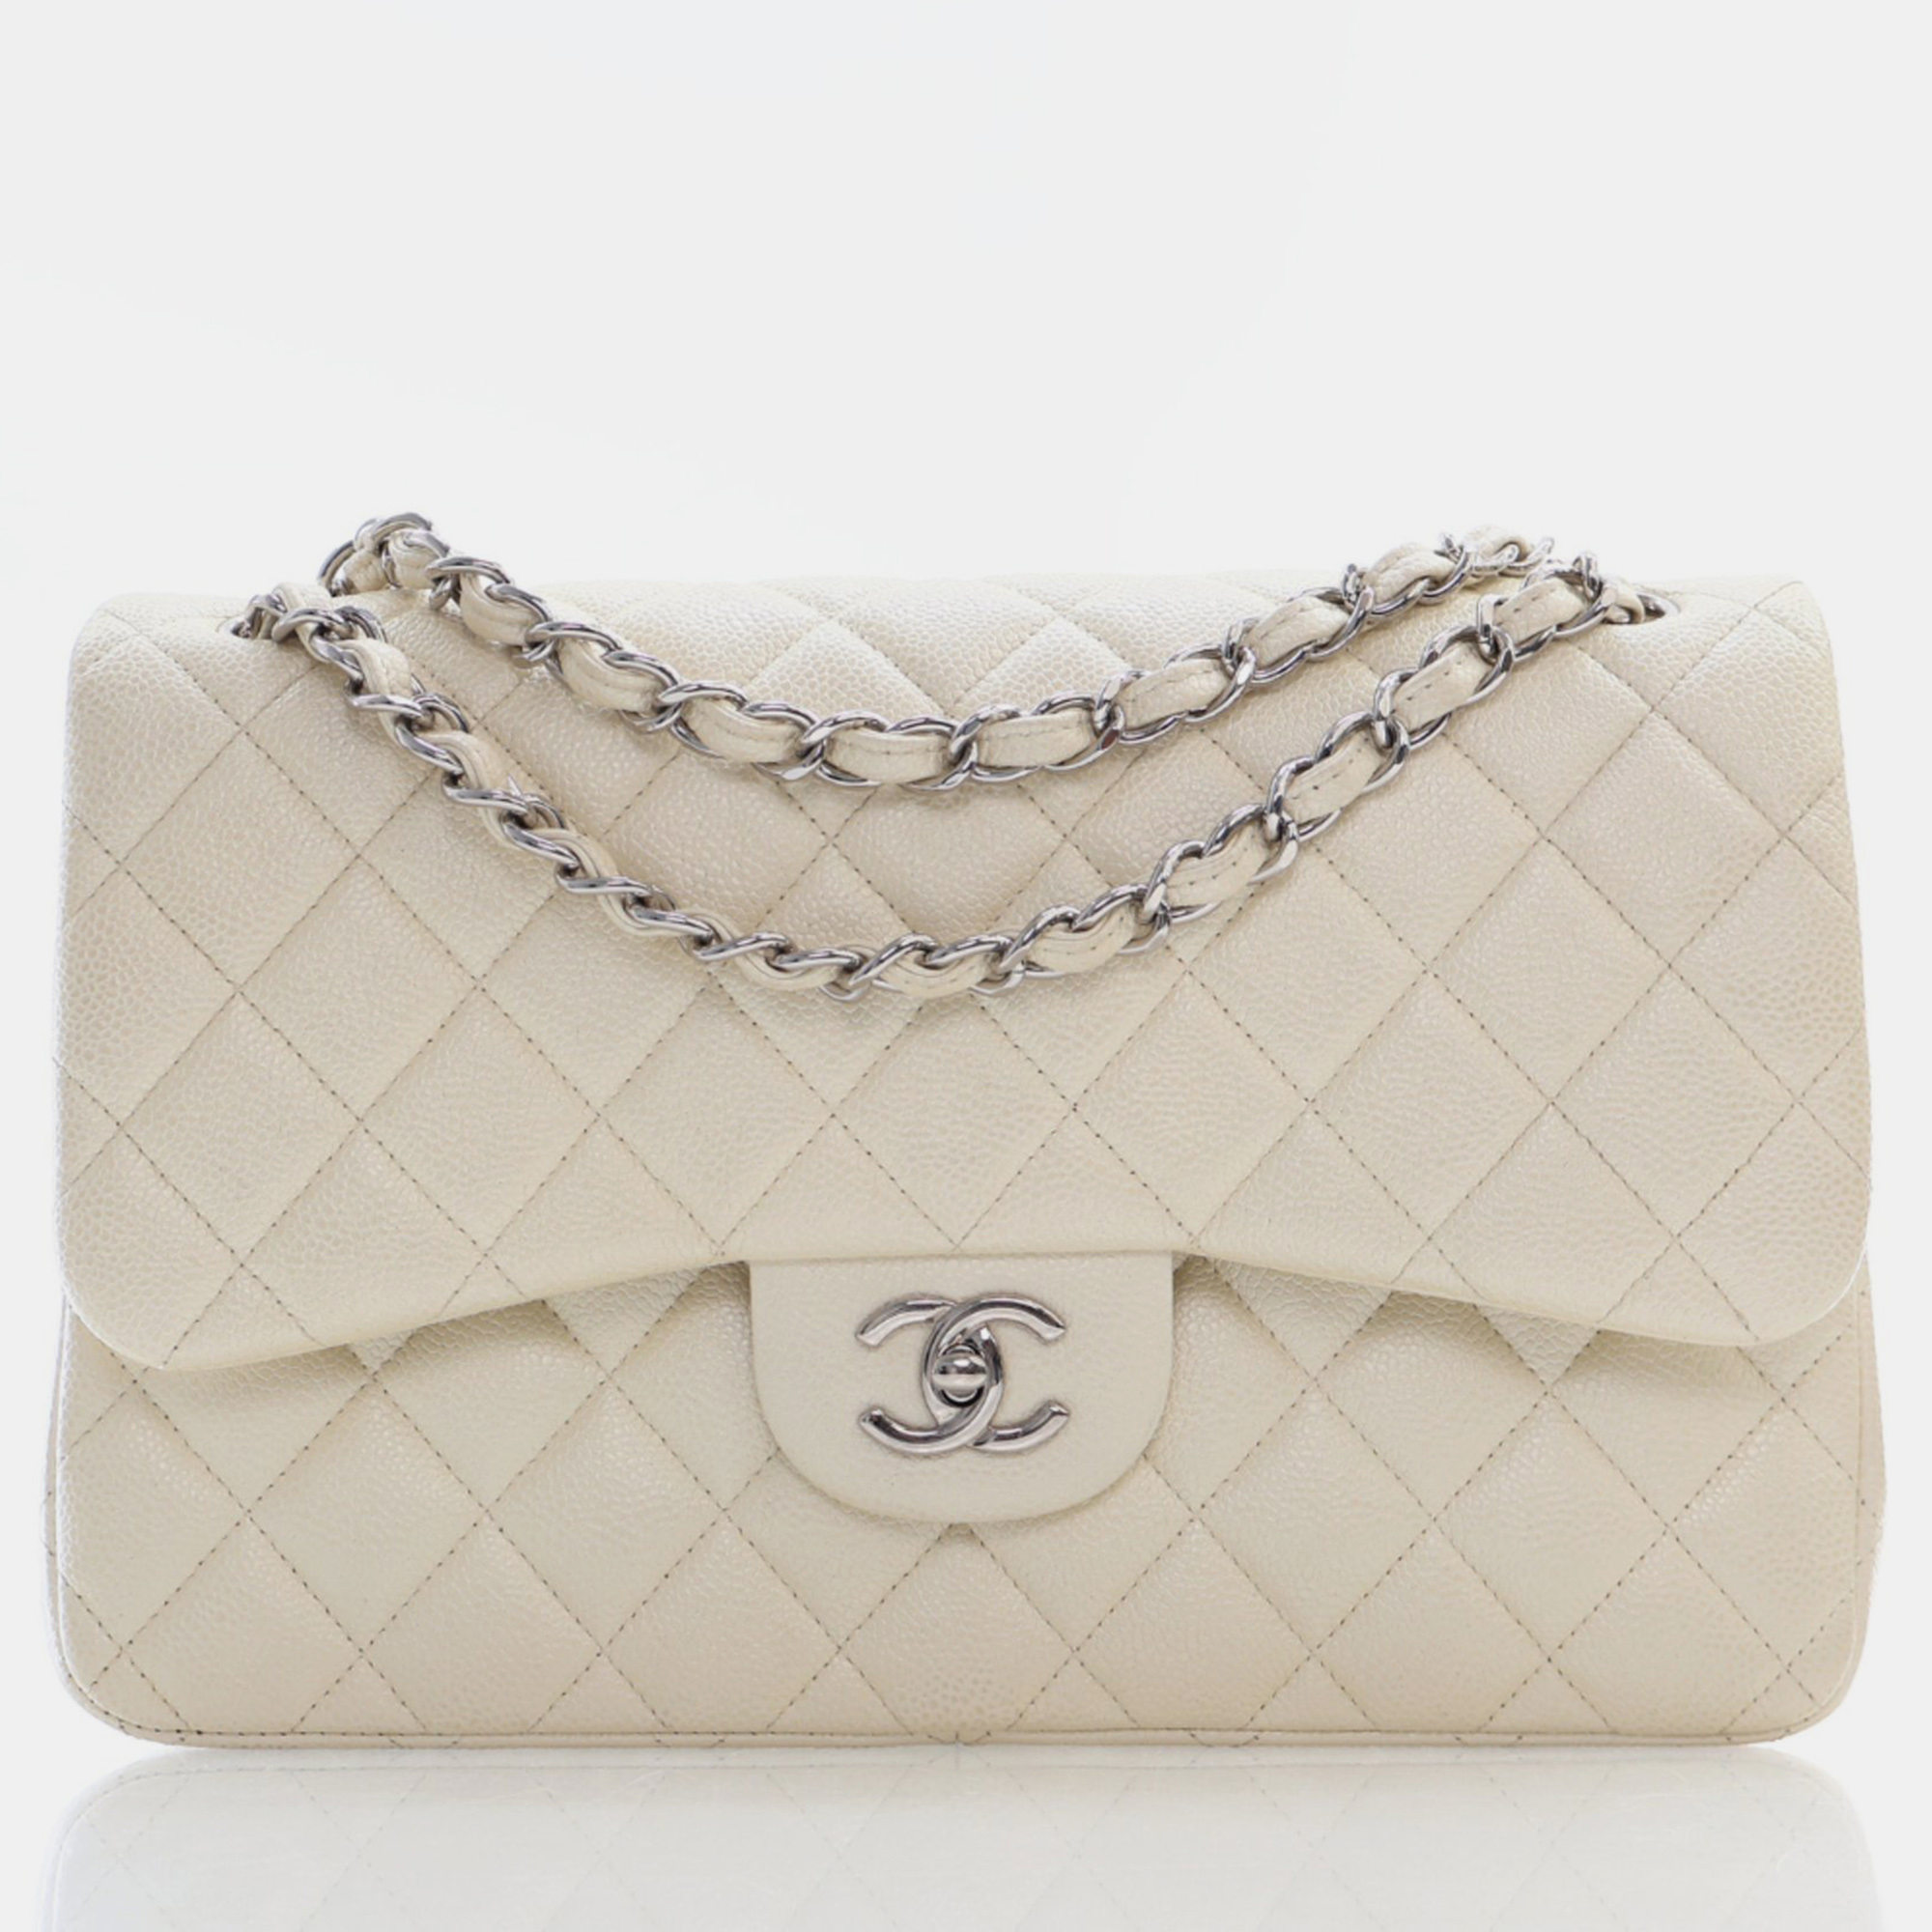 Chanel white caviar leather jumbo classic double flap shoulder bags